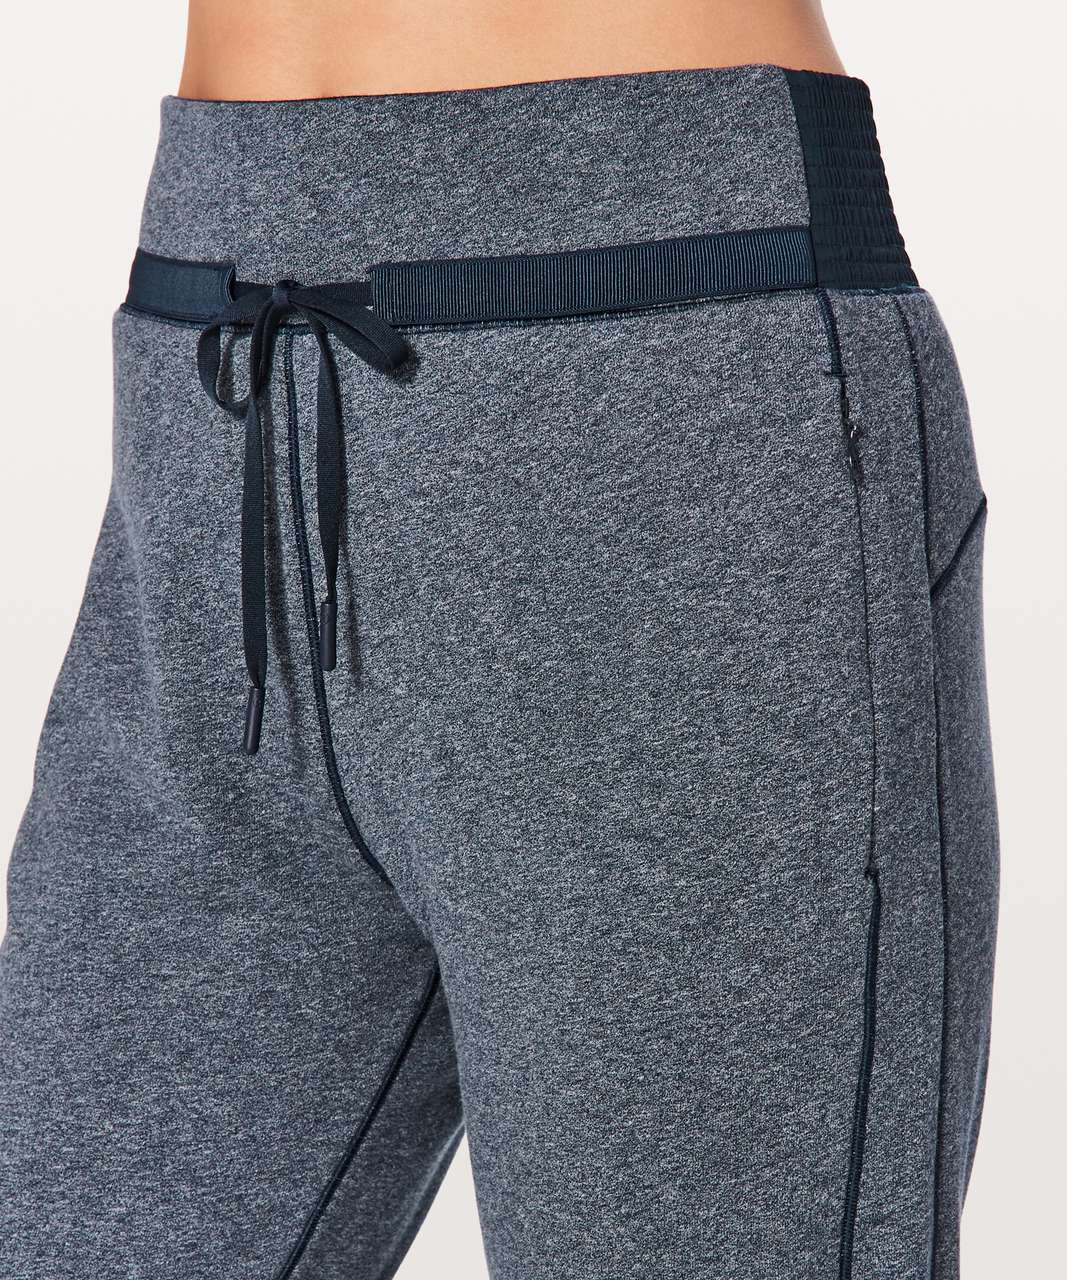 NWT Lululemon Cool and Collected Jogger Heathered Space Dye Nimbus, Size 12